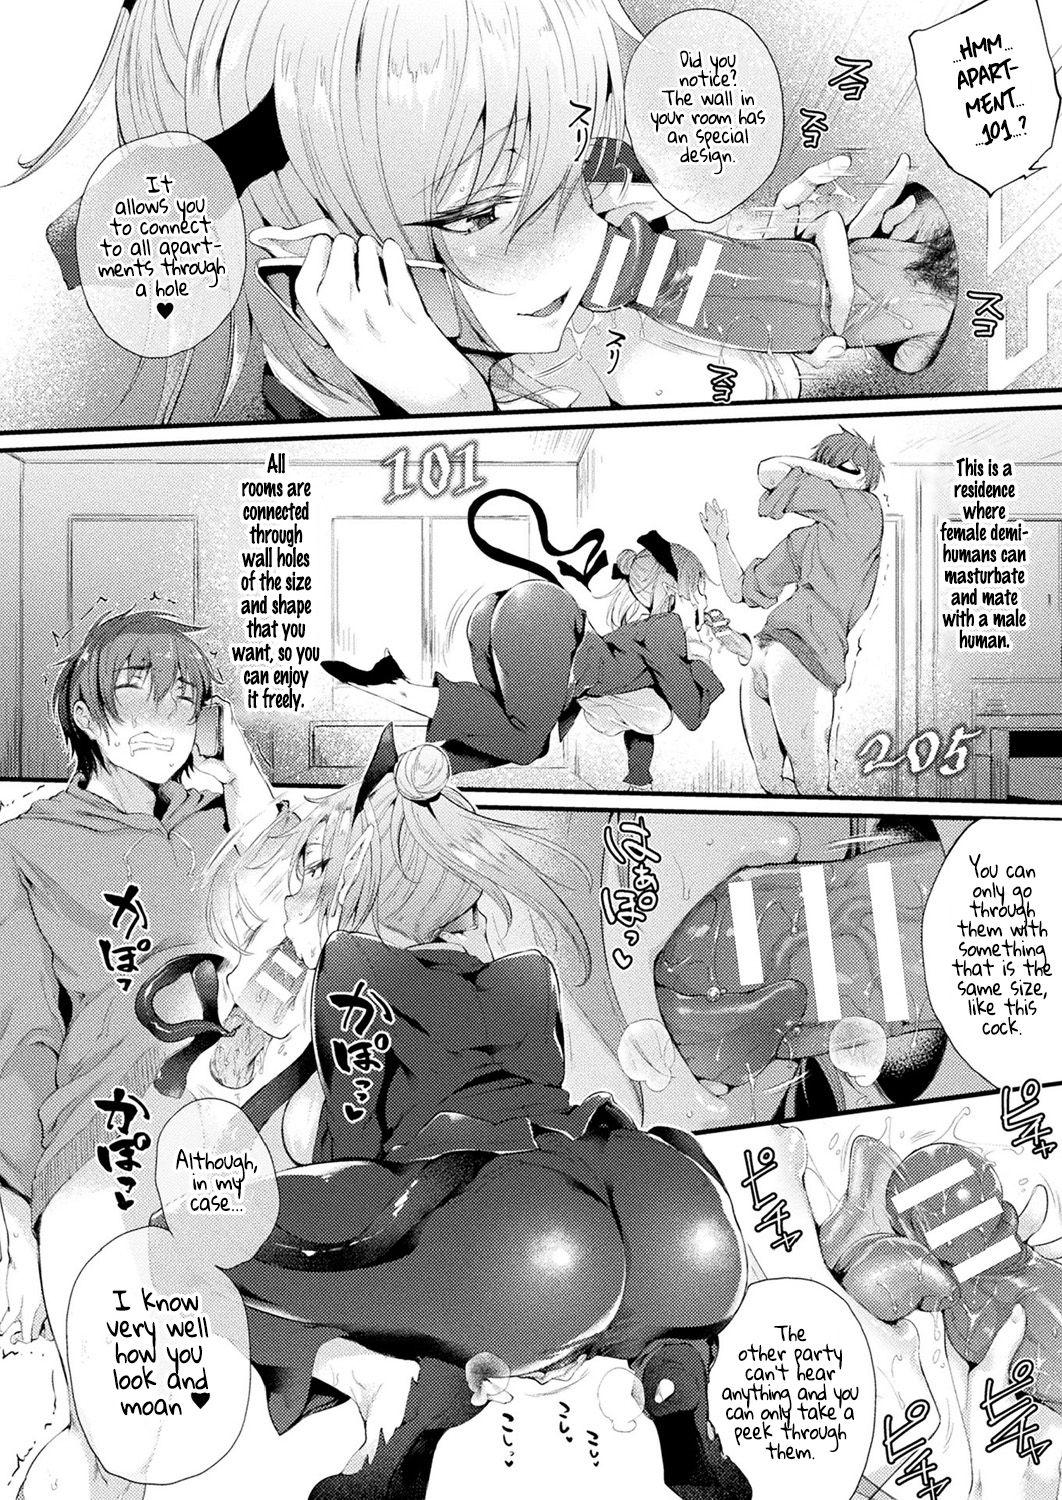 Boquete Kabeanatsuki Juukyo e Youkoso | Welcome to the Residence with Glory Holes Funk - Page 6